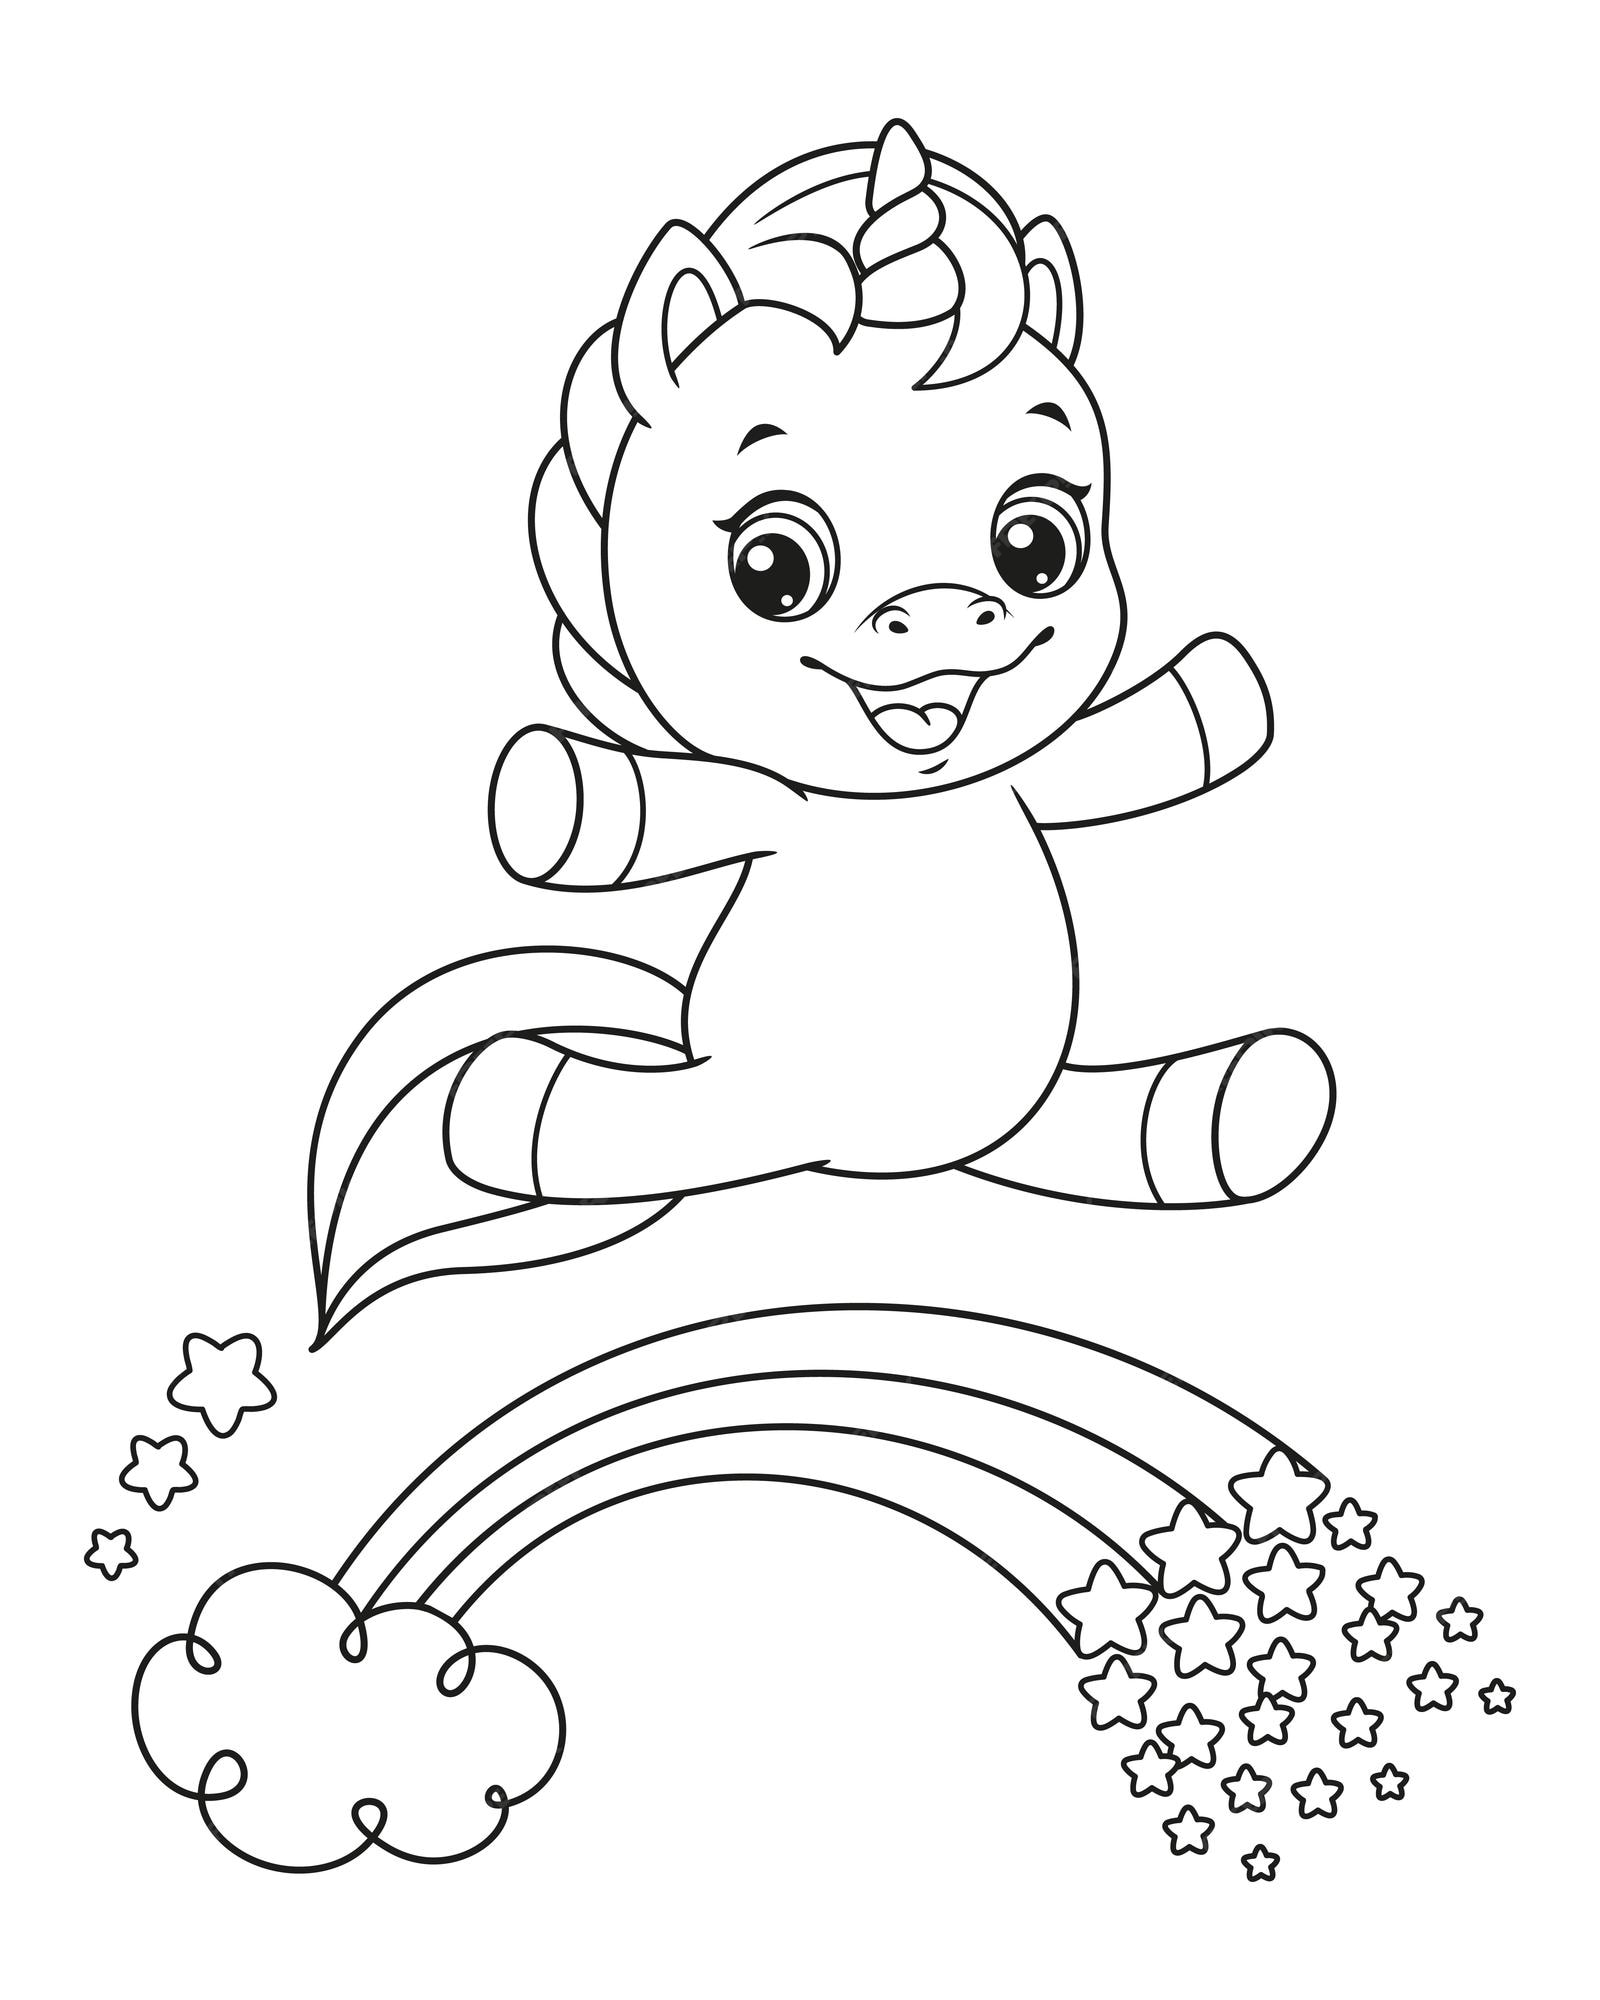 Unicorn coloring pages Vectors & Illustrations for Free Download ...